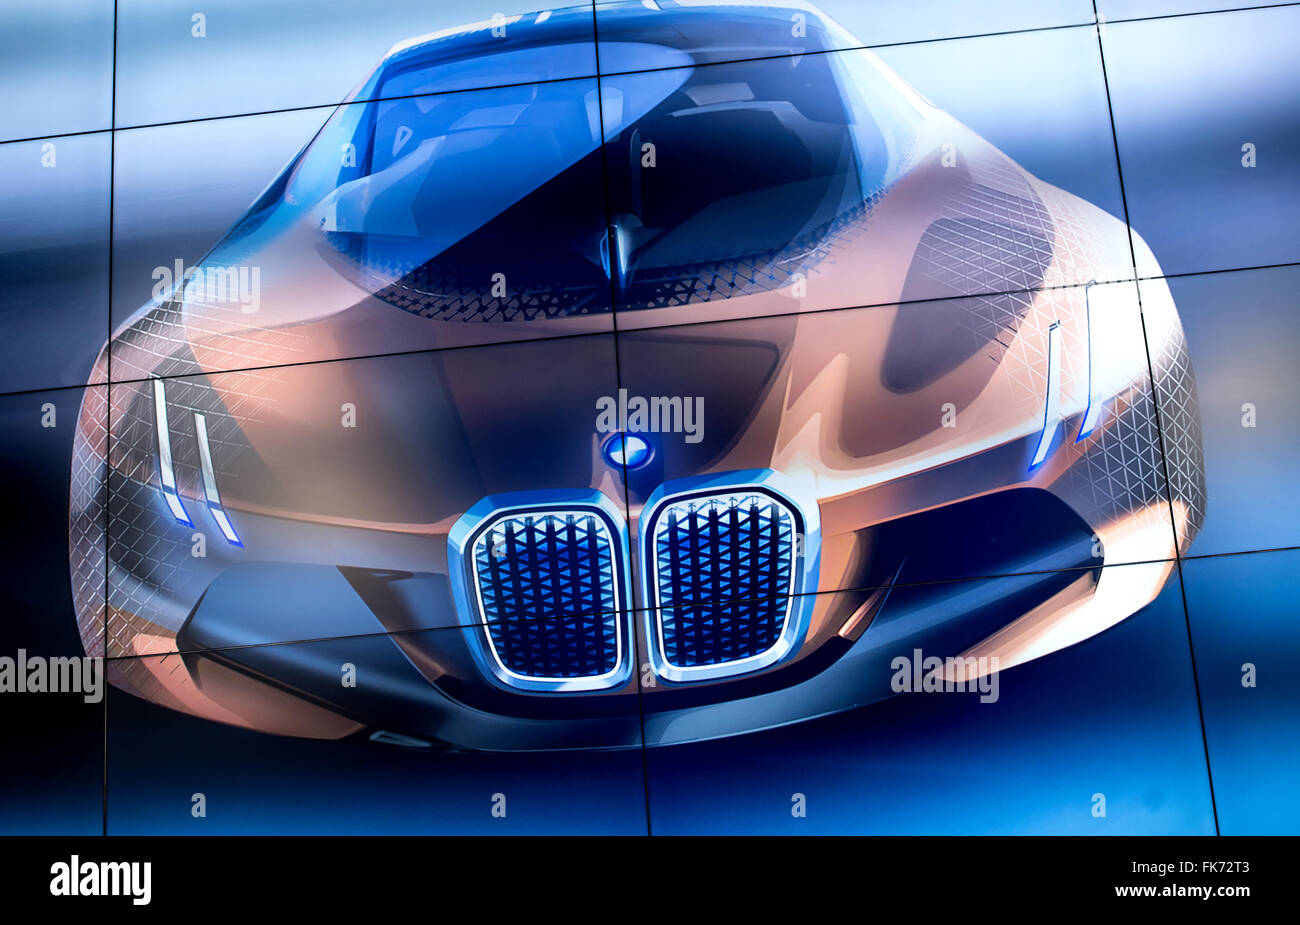 The concept 'BMW Vision Next 100' being presented in Munich, Germany, 7 march 2016. On 7 March 1916, the 'Bayerische Flugzeugwerke' (lit. 'Bavarian Aircraft Works') were founded, later named 'Bayerische Motoren Werke' (lit. 'Bavarian Motor Works', BWM). PHOTO: SVEN HOPPE/dpa Stock Photo